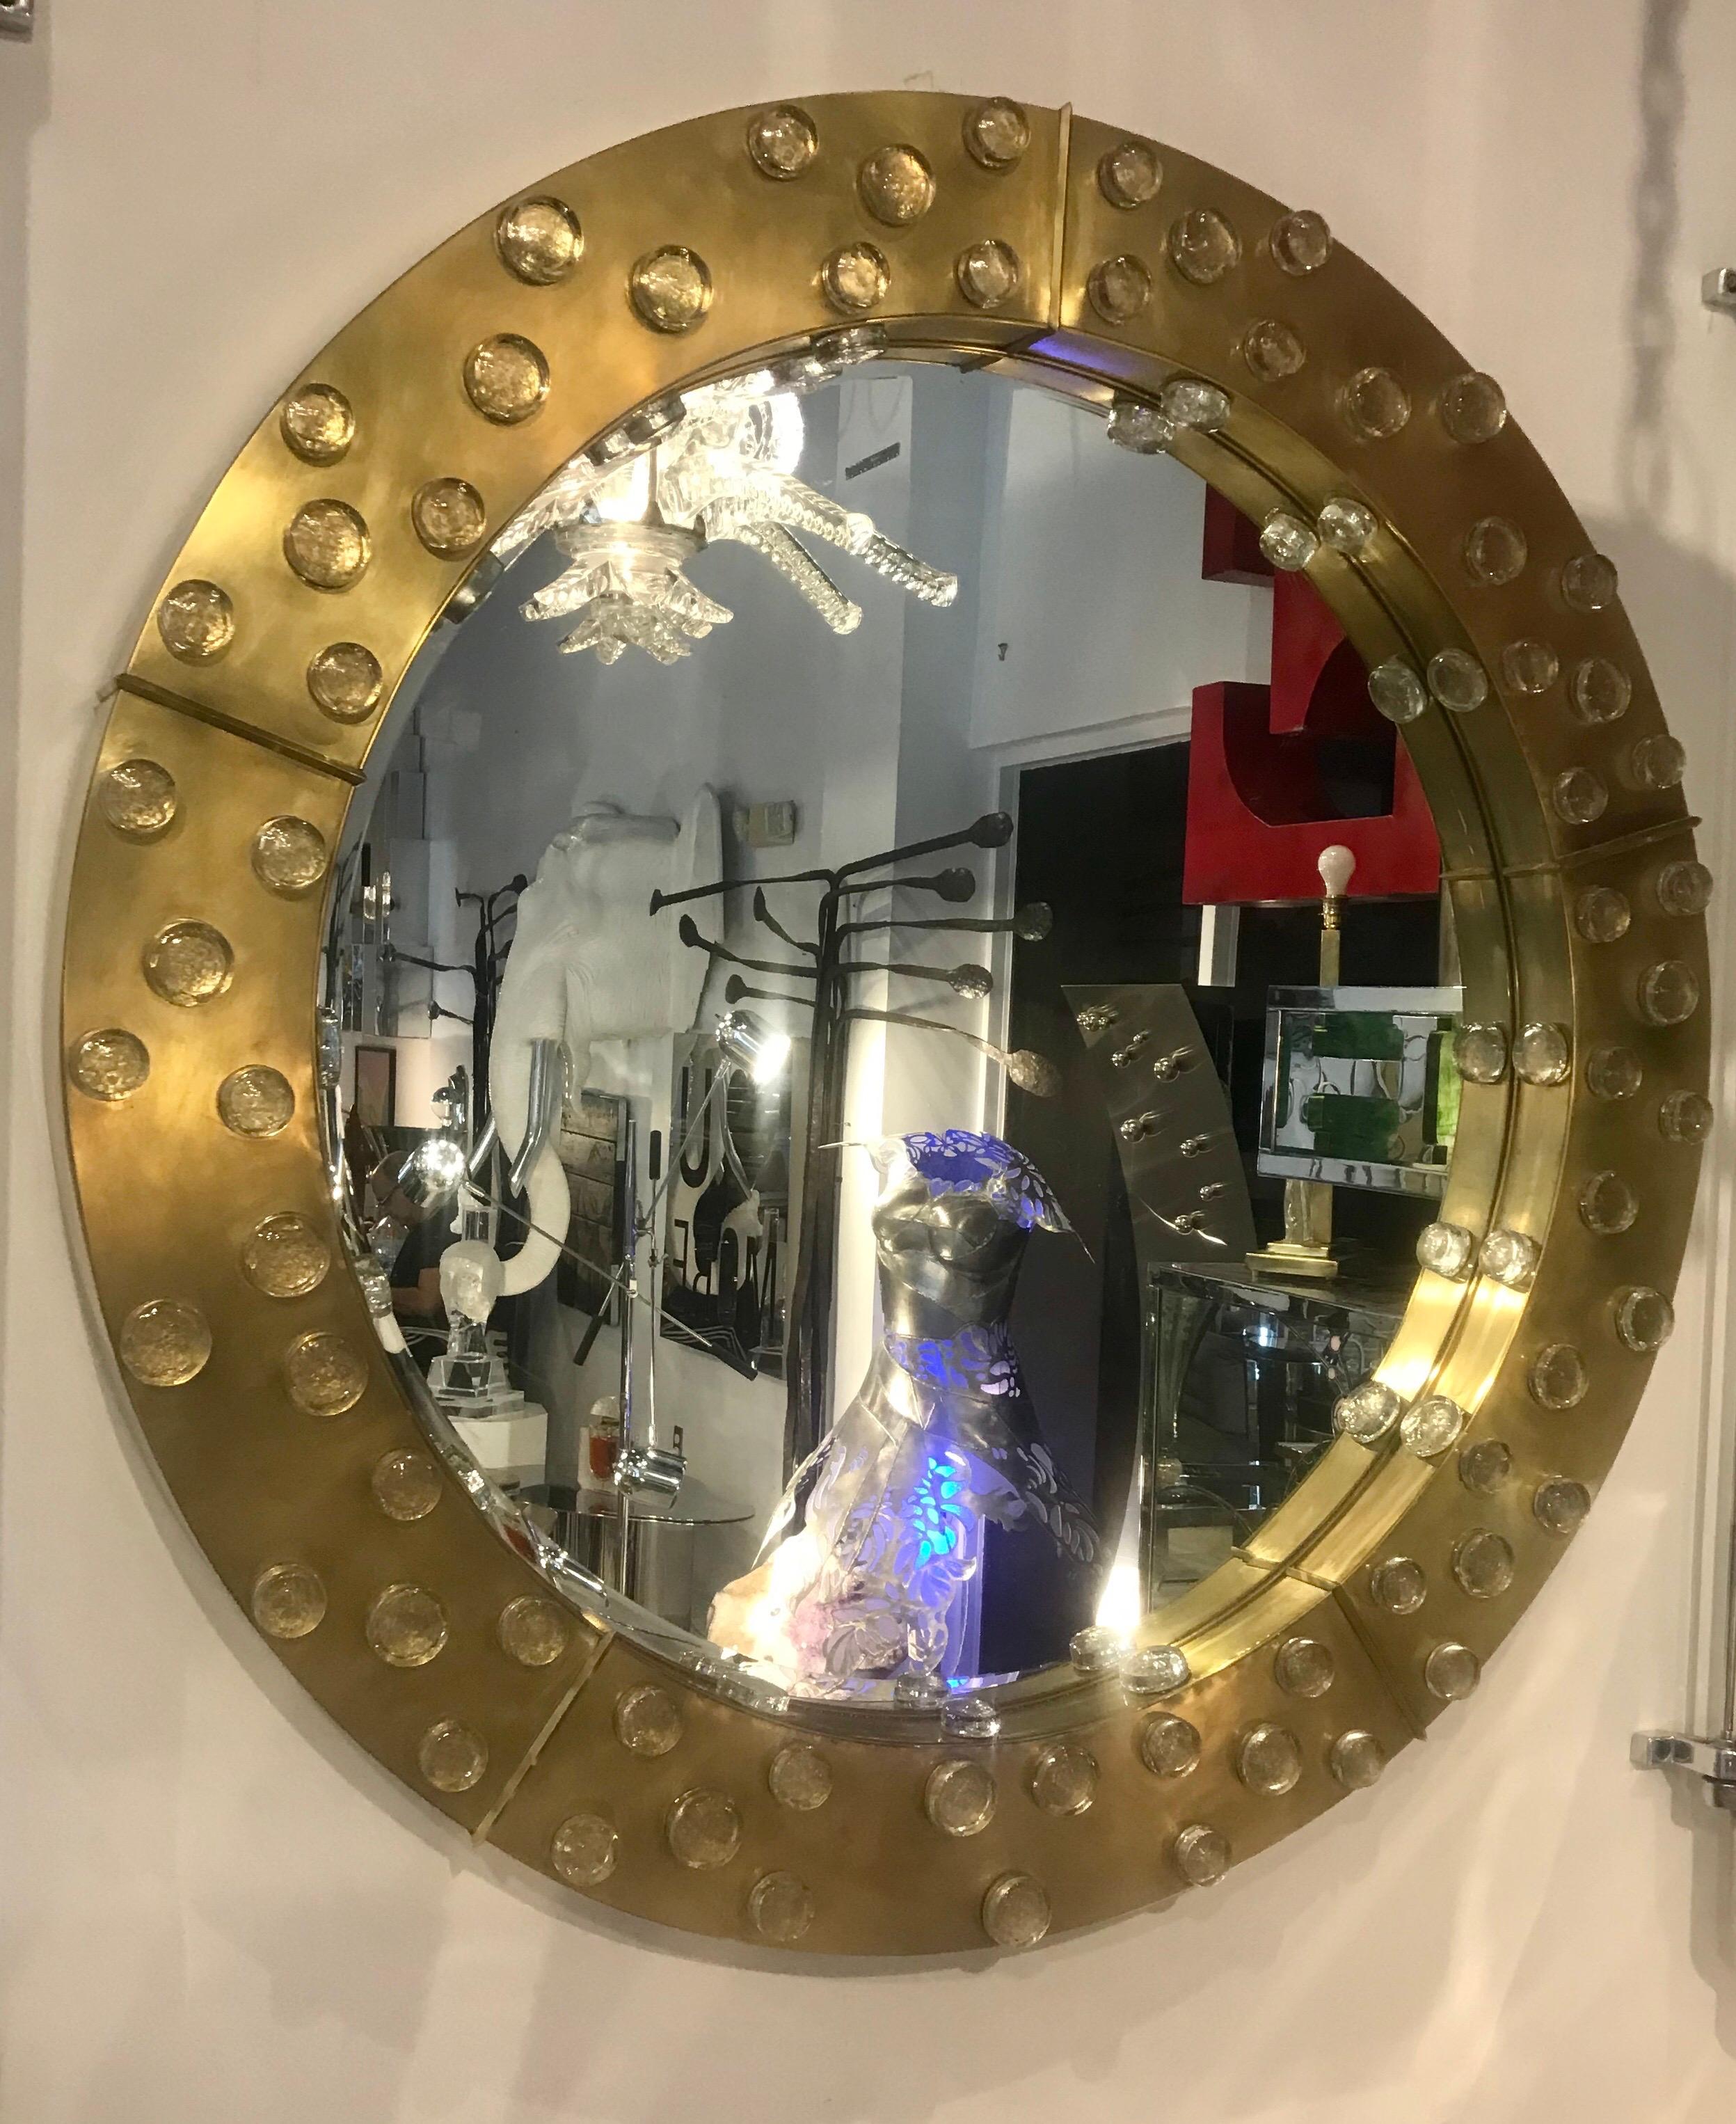 Spectacular large round Italian brass framed mirror adorned with hand blown Murano glass.